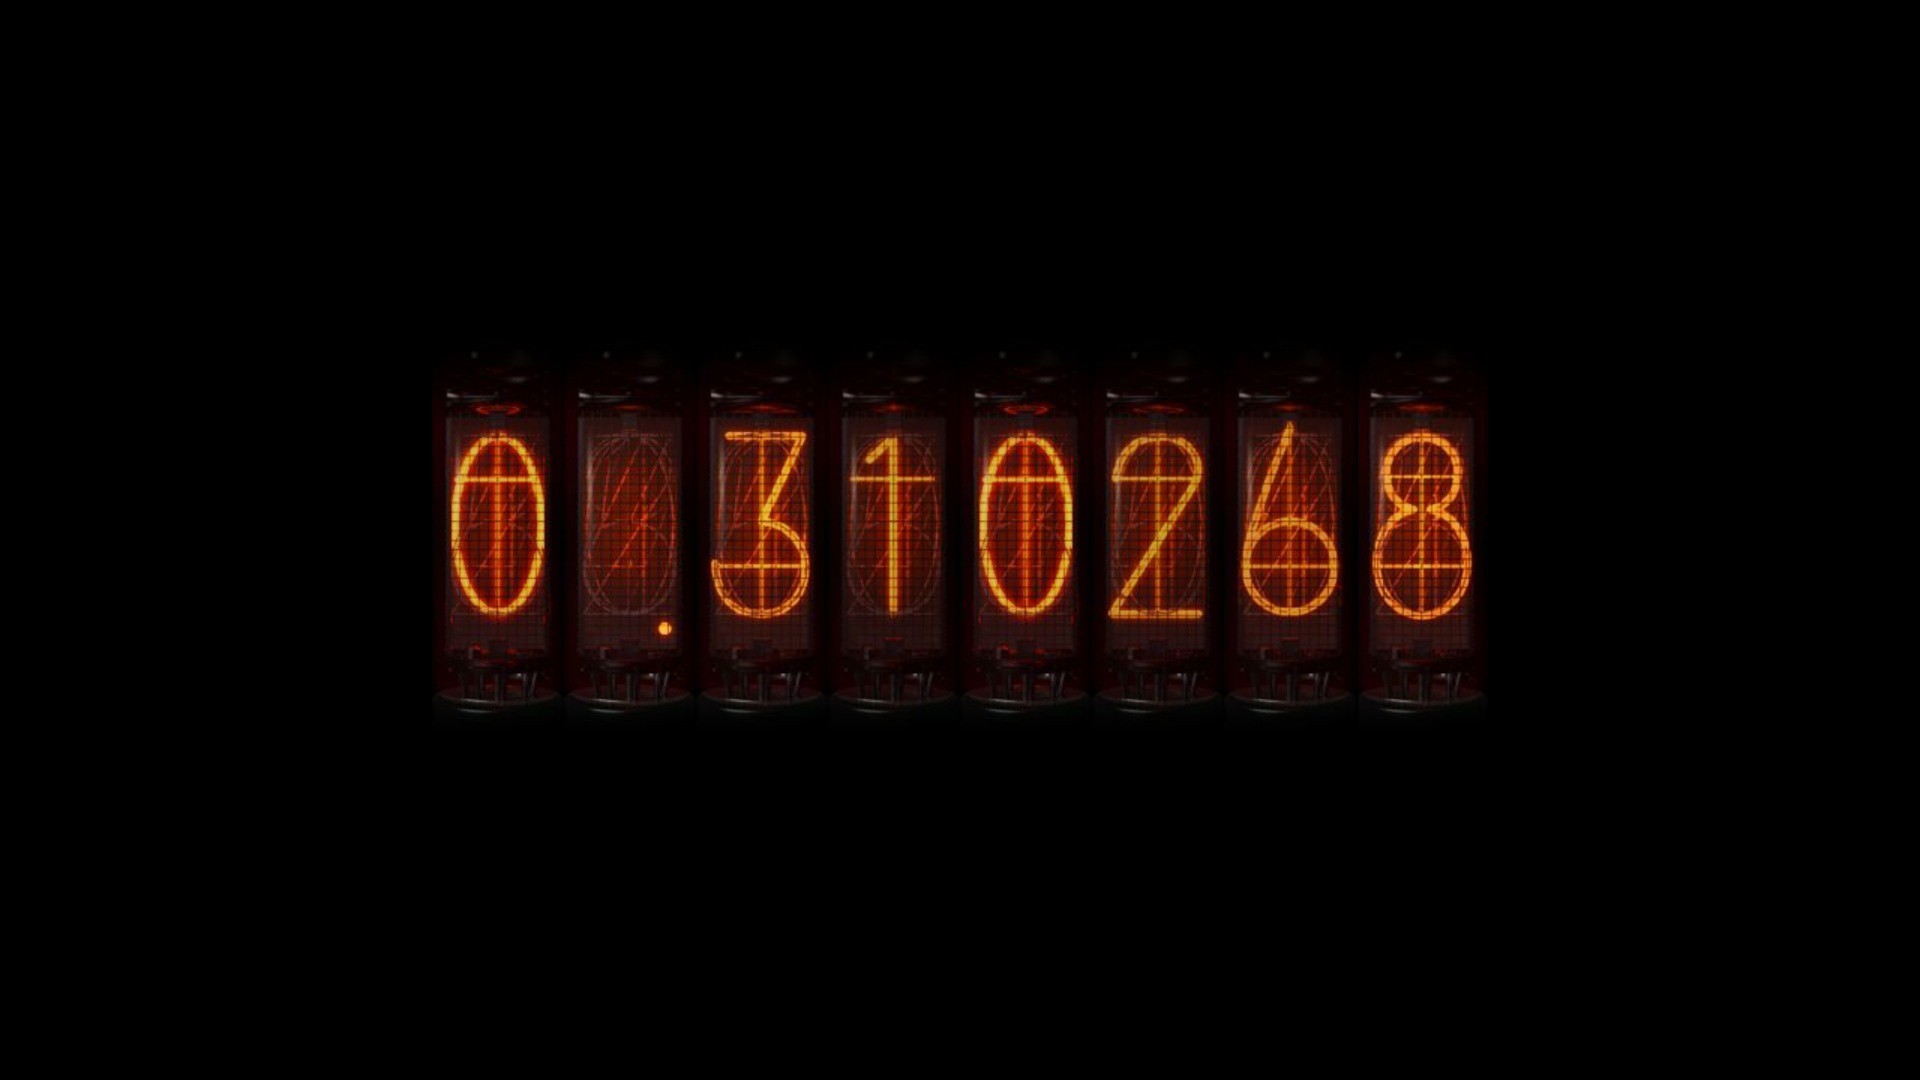 Steins Gate Anime Time Travel Divergence Meter Nixie Tubes Numbers Wallpaper Resolution 19x1080 Id 360 Wallha Com